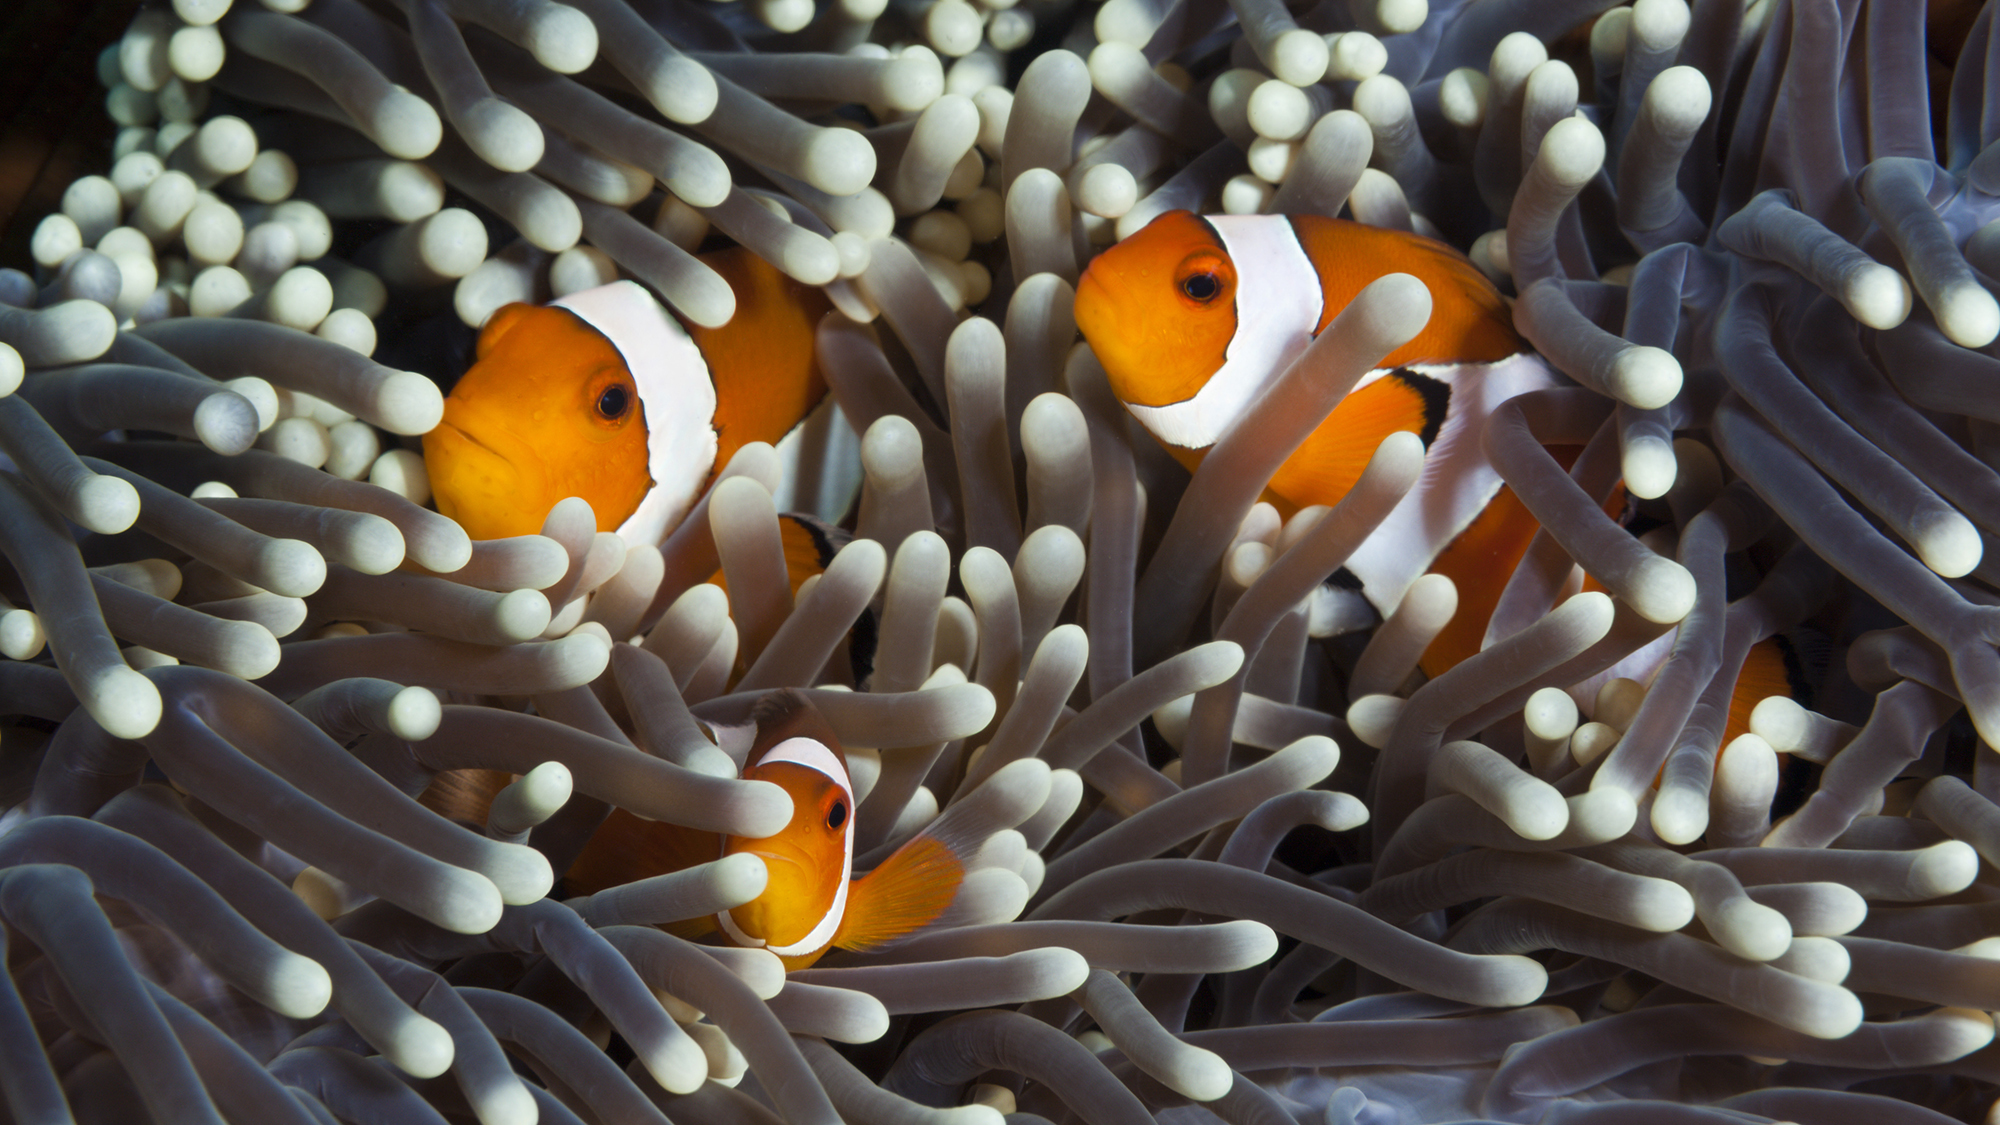 Can clownfish count?